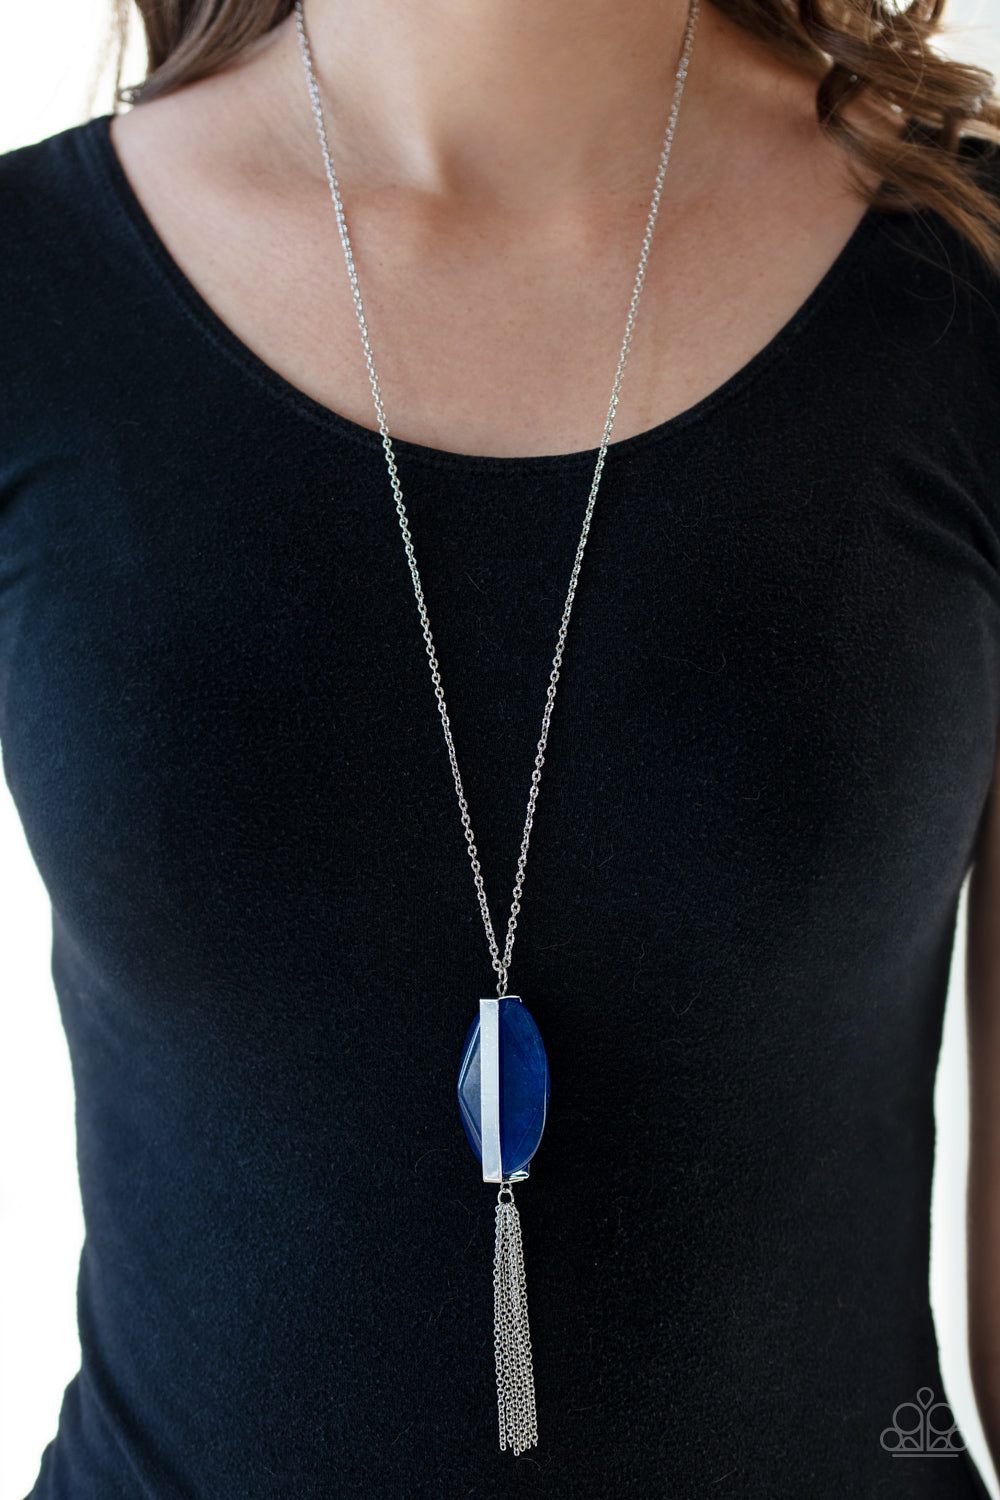 Paparazzi Necklaces - Tranquility Trend - Blue